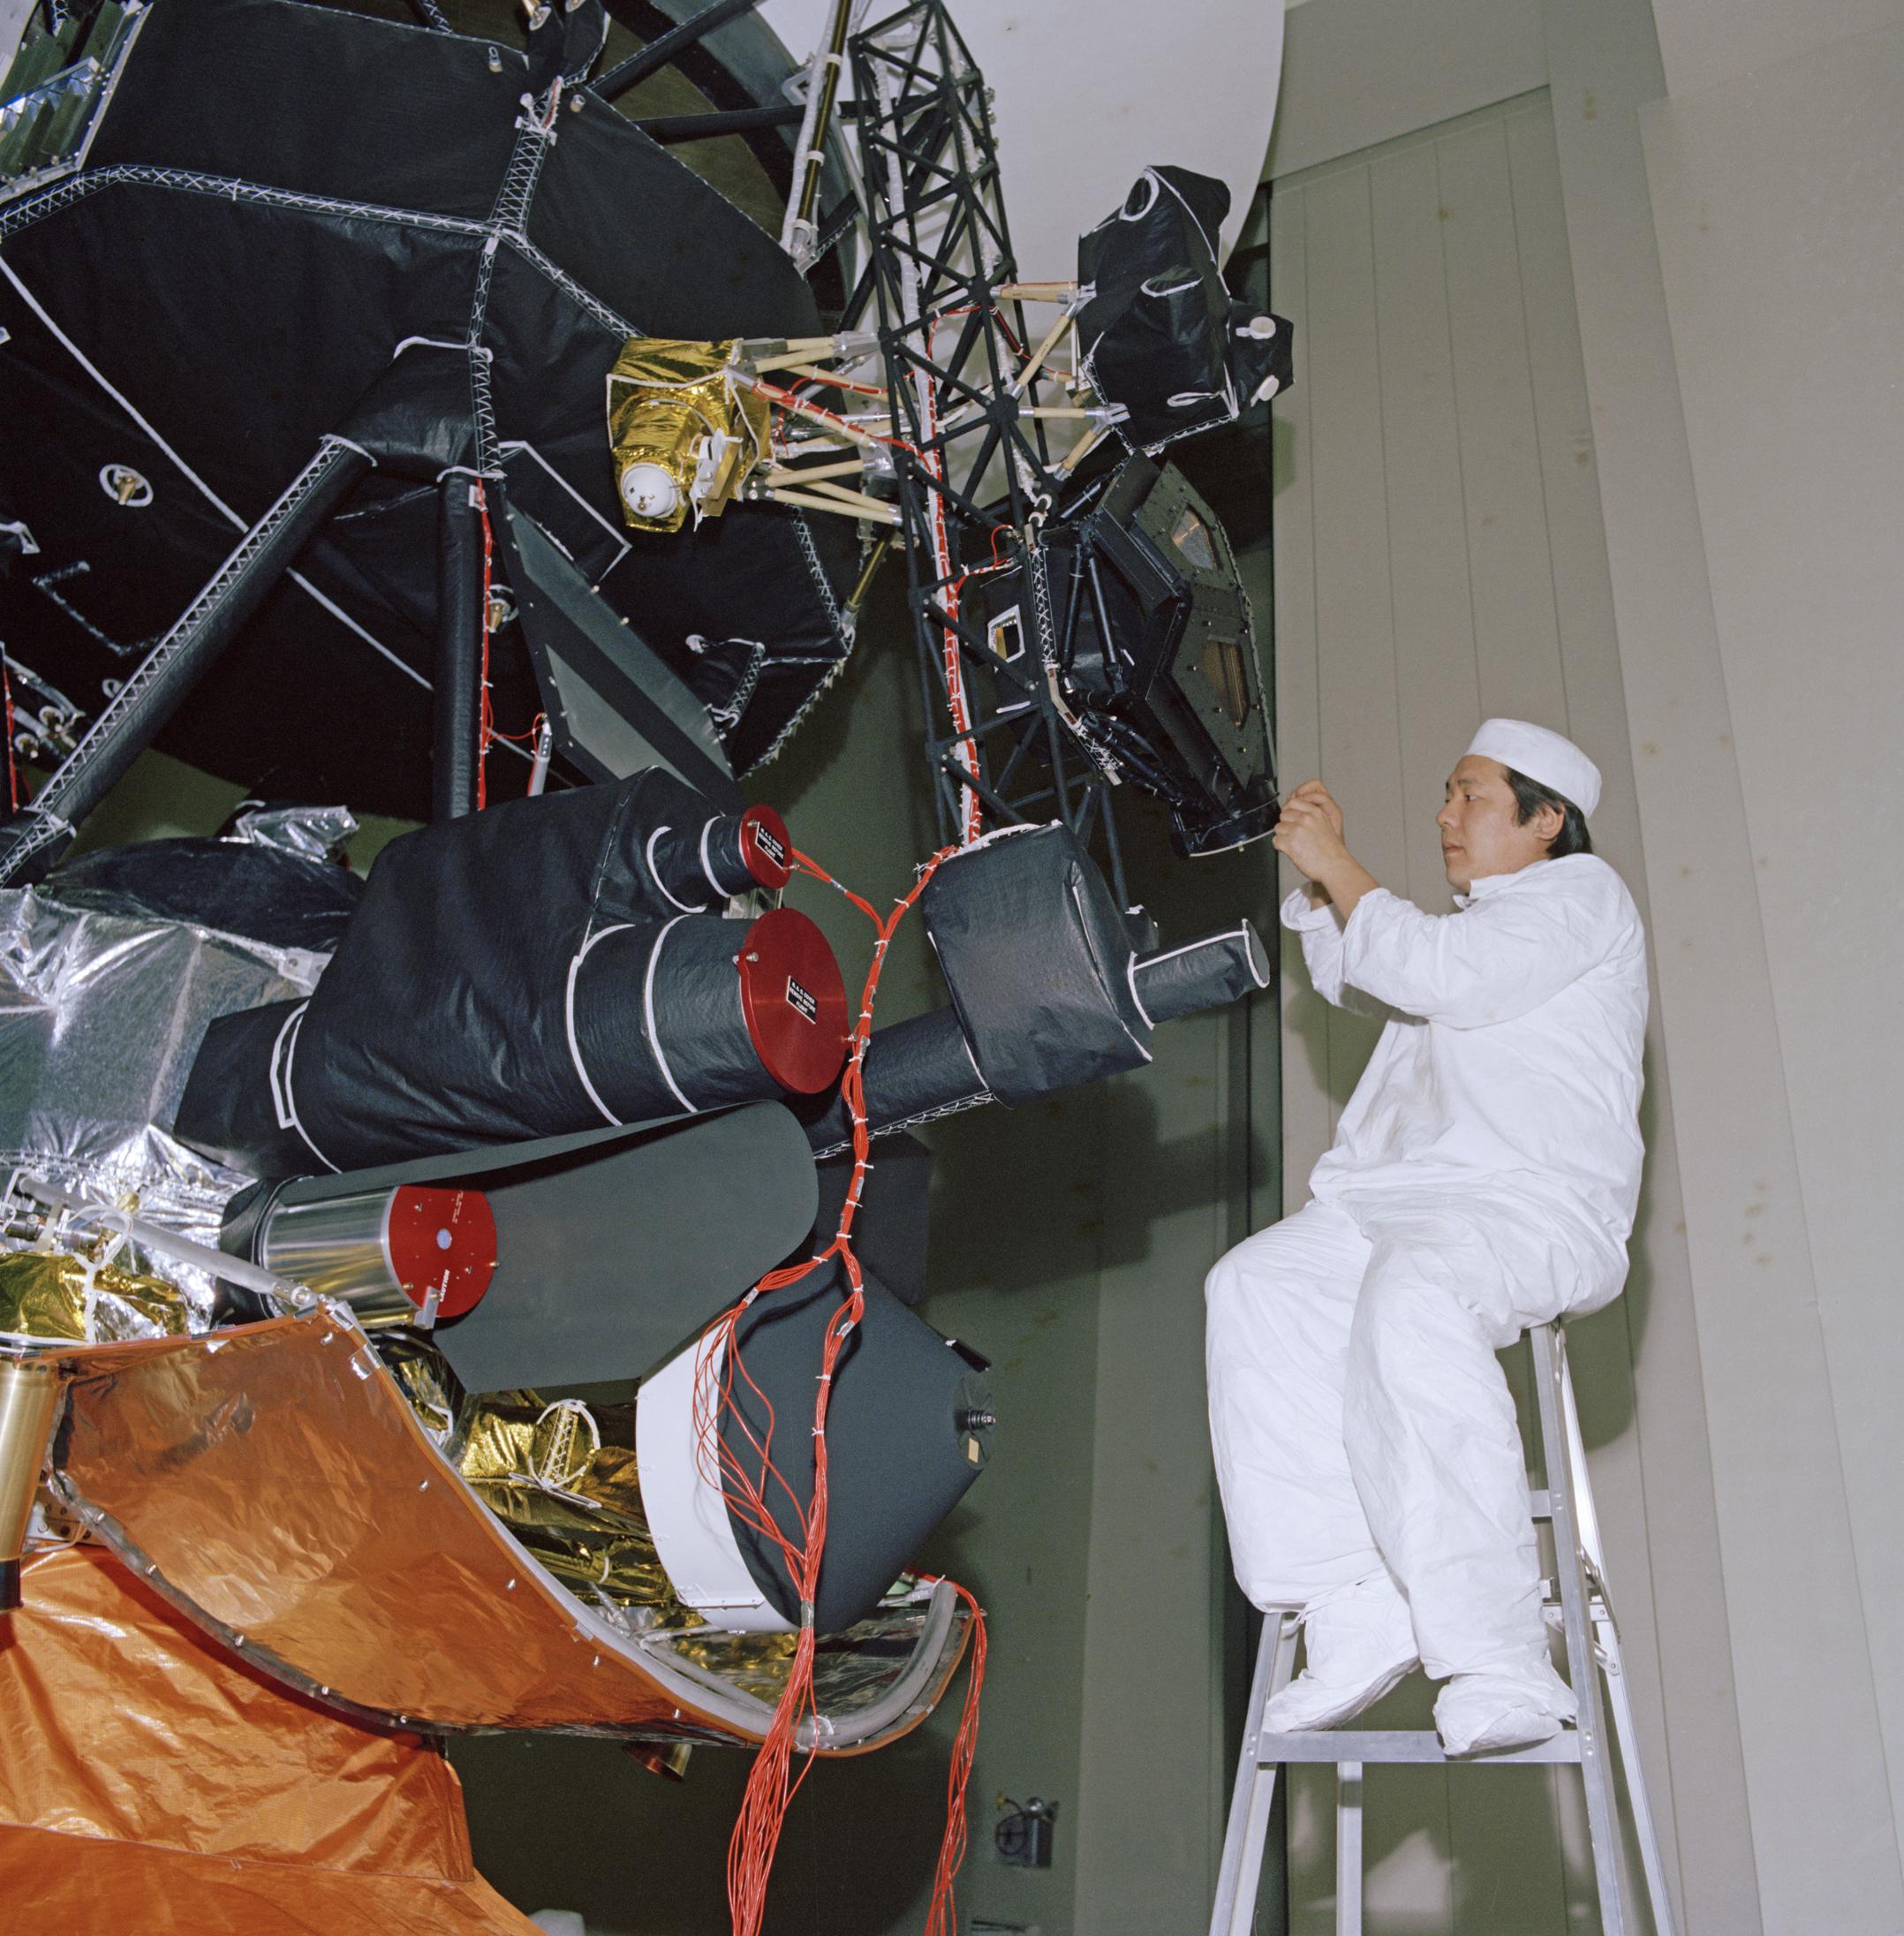 An engineer works on vibration acoustics and pyro shock testing for one of NASA's Voyager spacecraft. Several of the spacecraft's science instruments are visible at left.